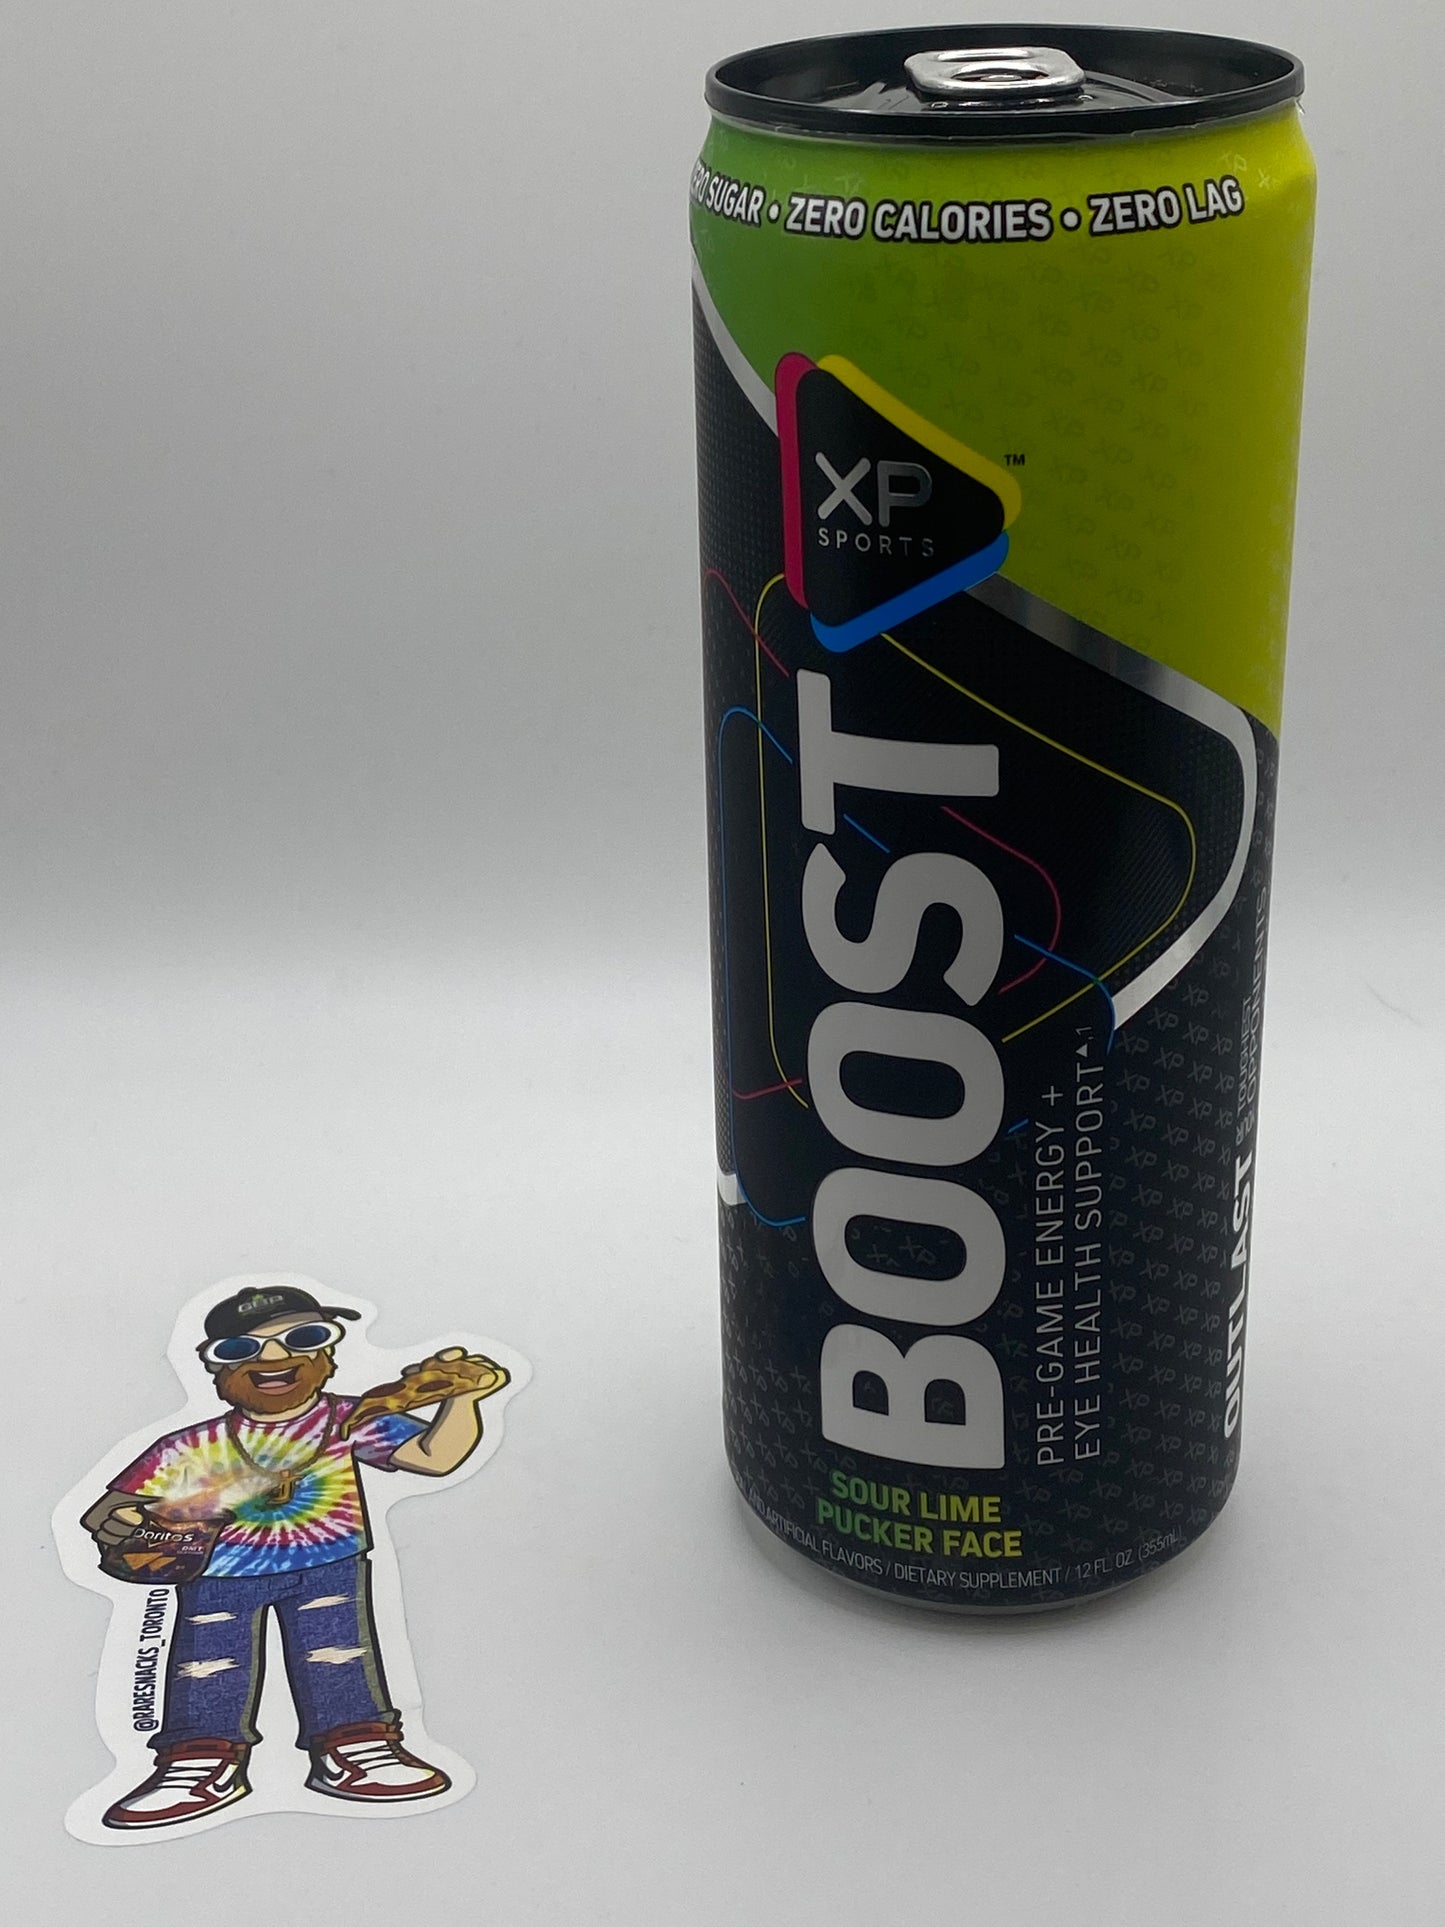 XP sports Boost Energy Drink Sour Lime Pucker Face